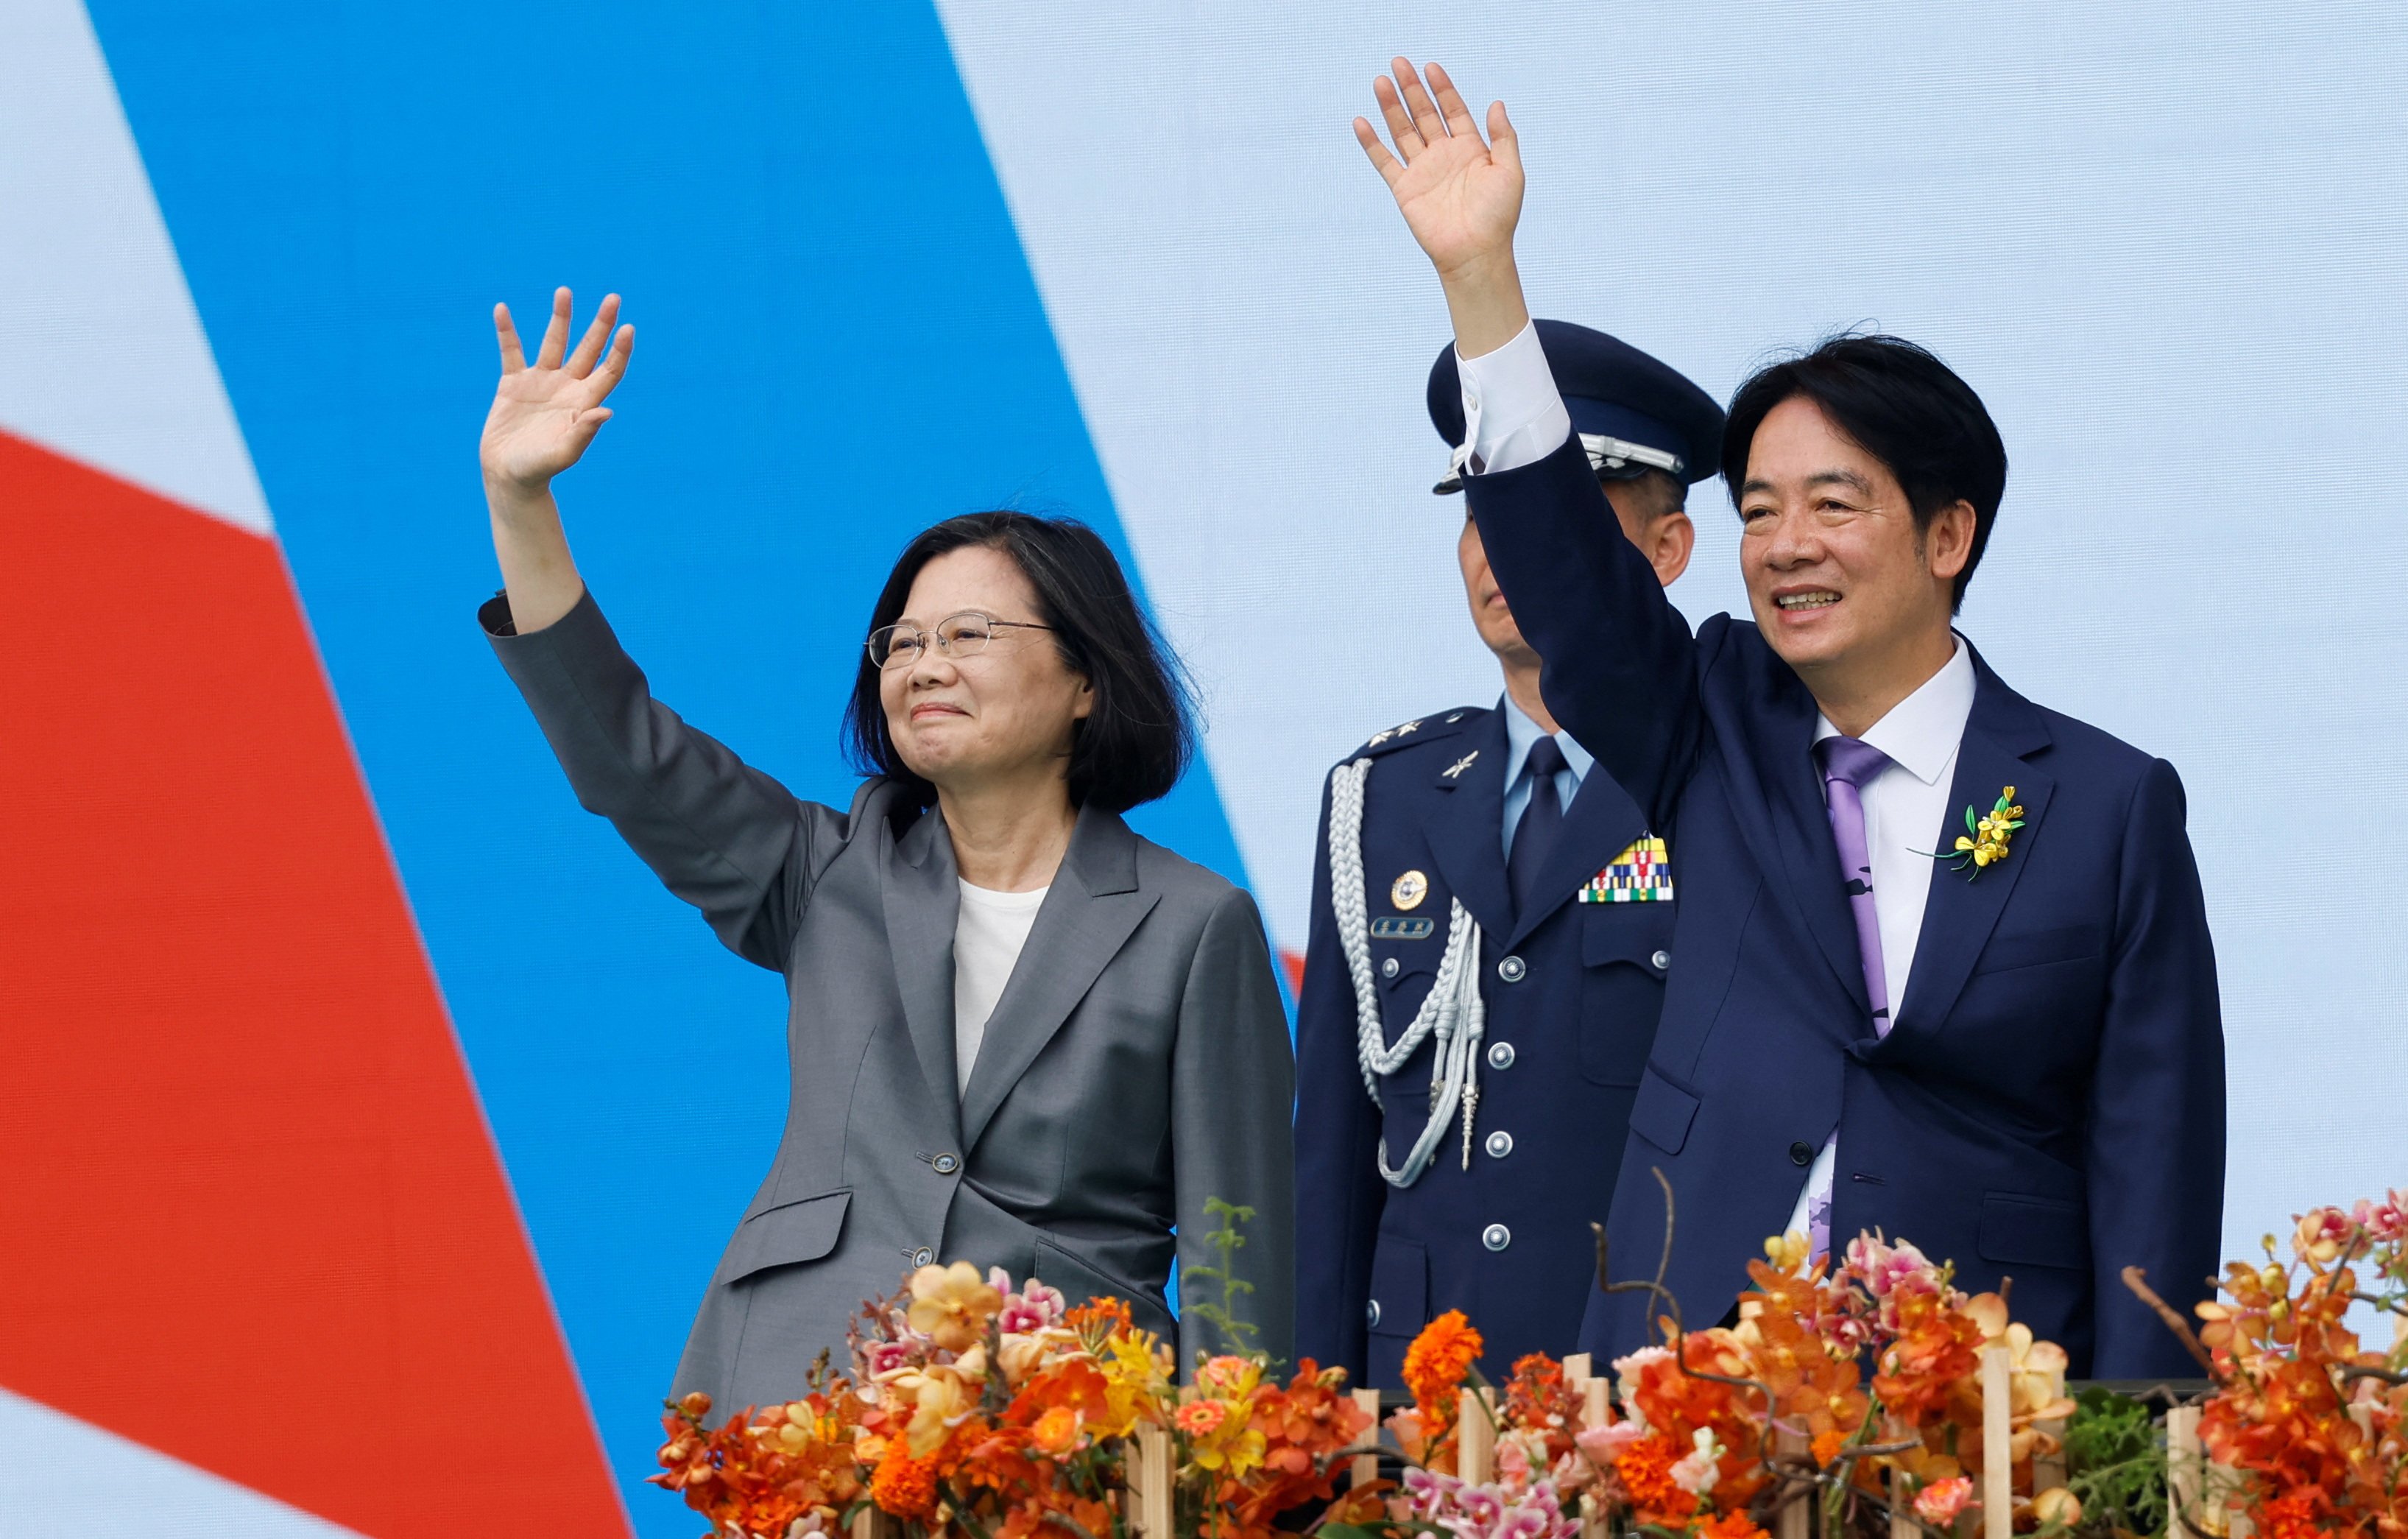 Taiwan’s former president Tsai Ing-wen and new President William Lai Ching-te wave during the inauguration ceremony outside the presidential office building in Taipei on Monday, May 20. Photo: Reuters